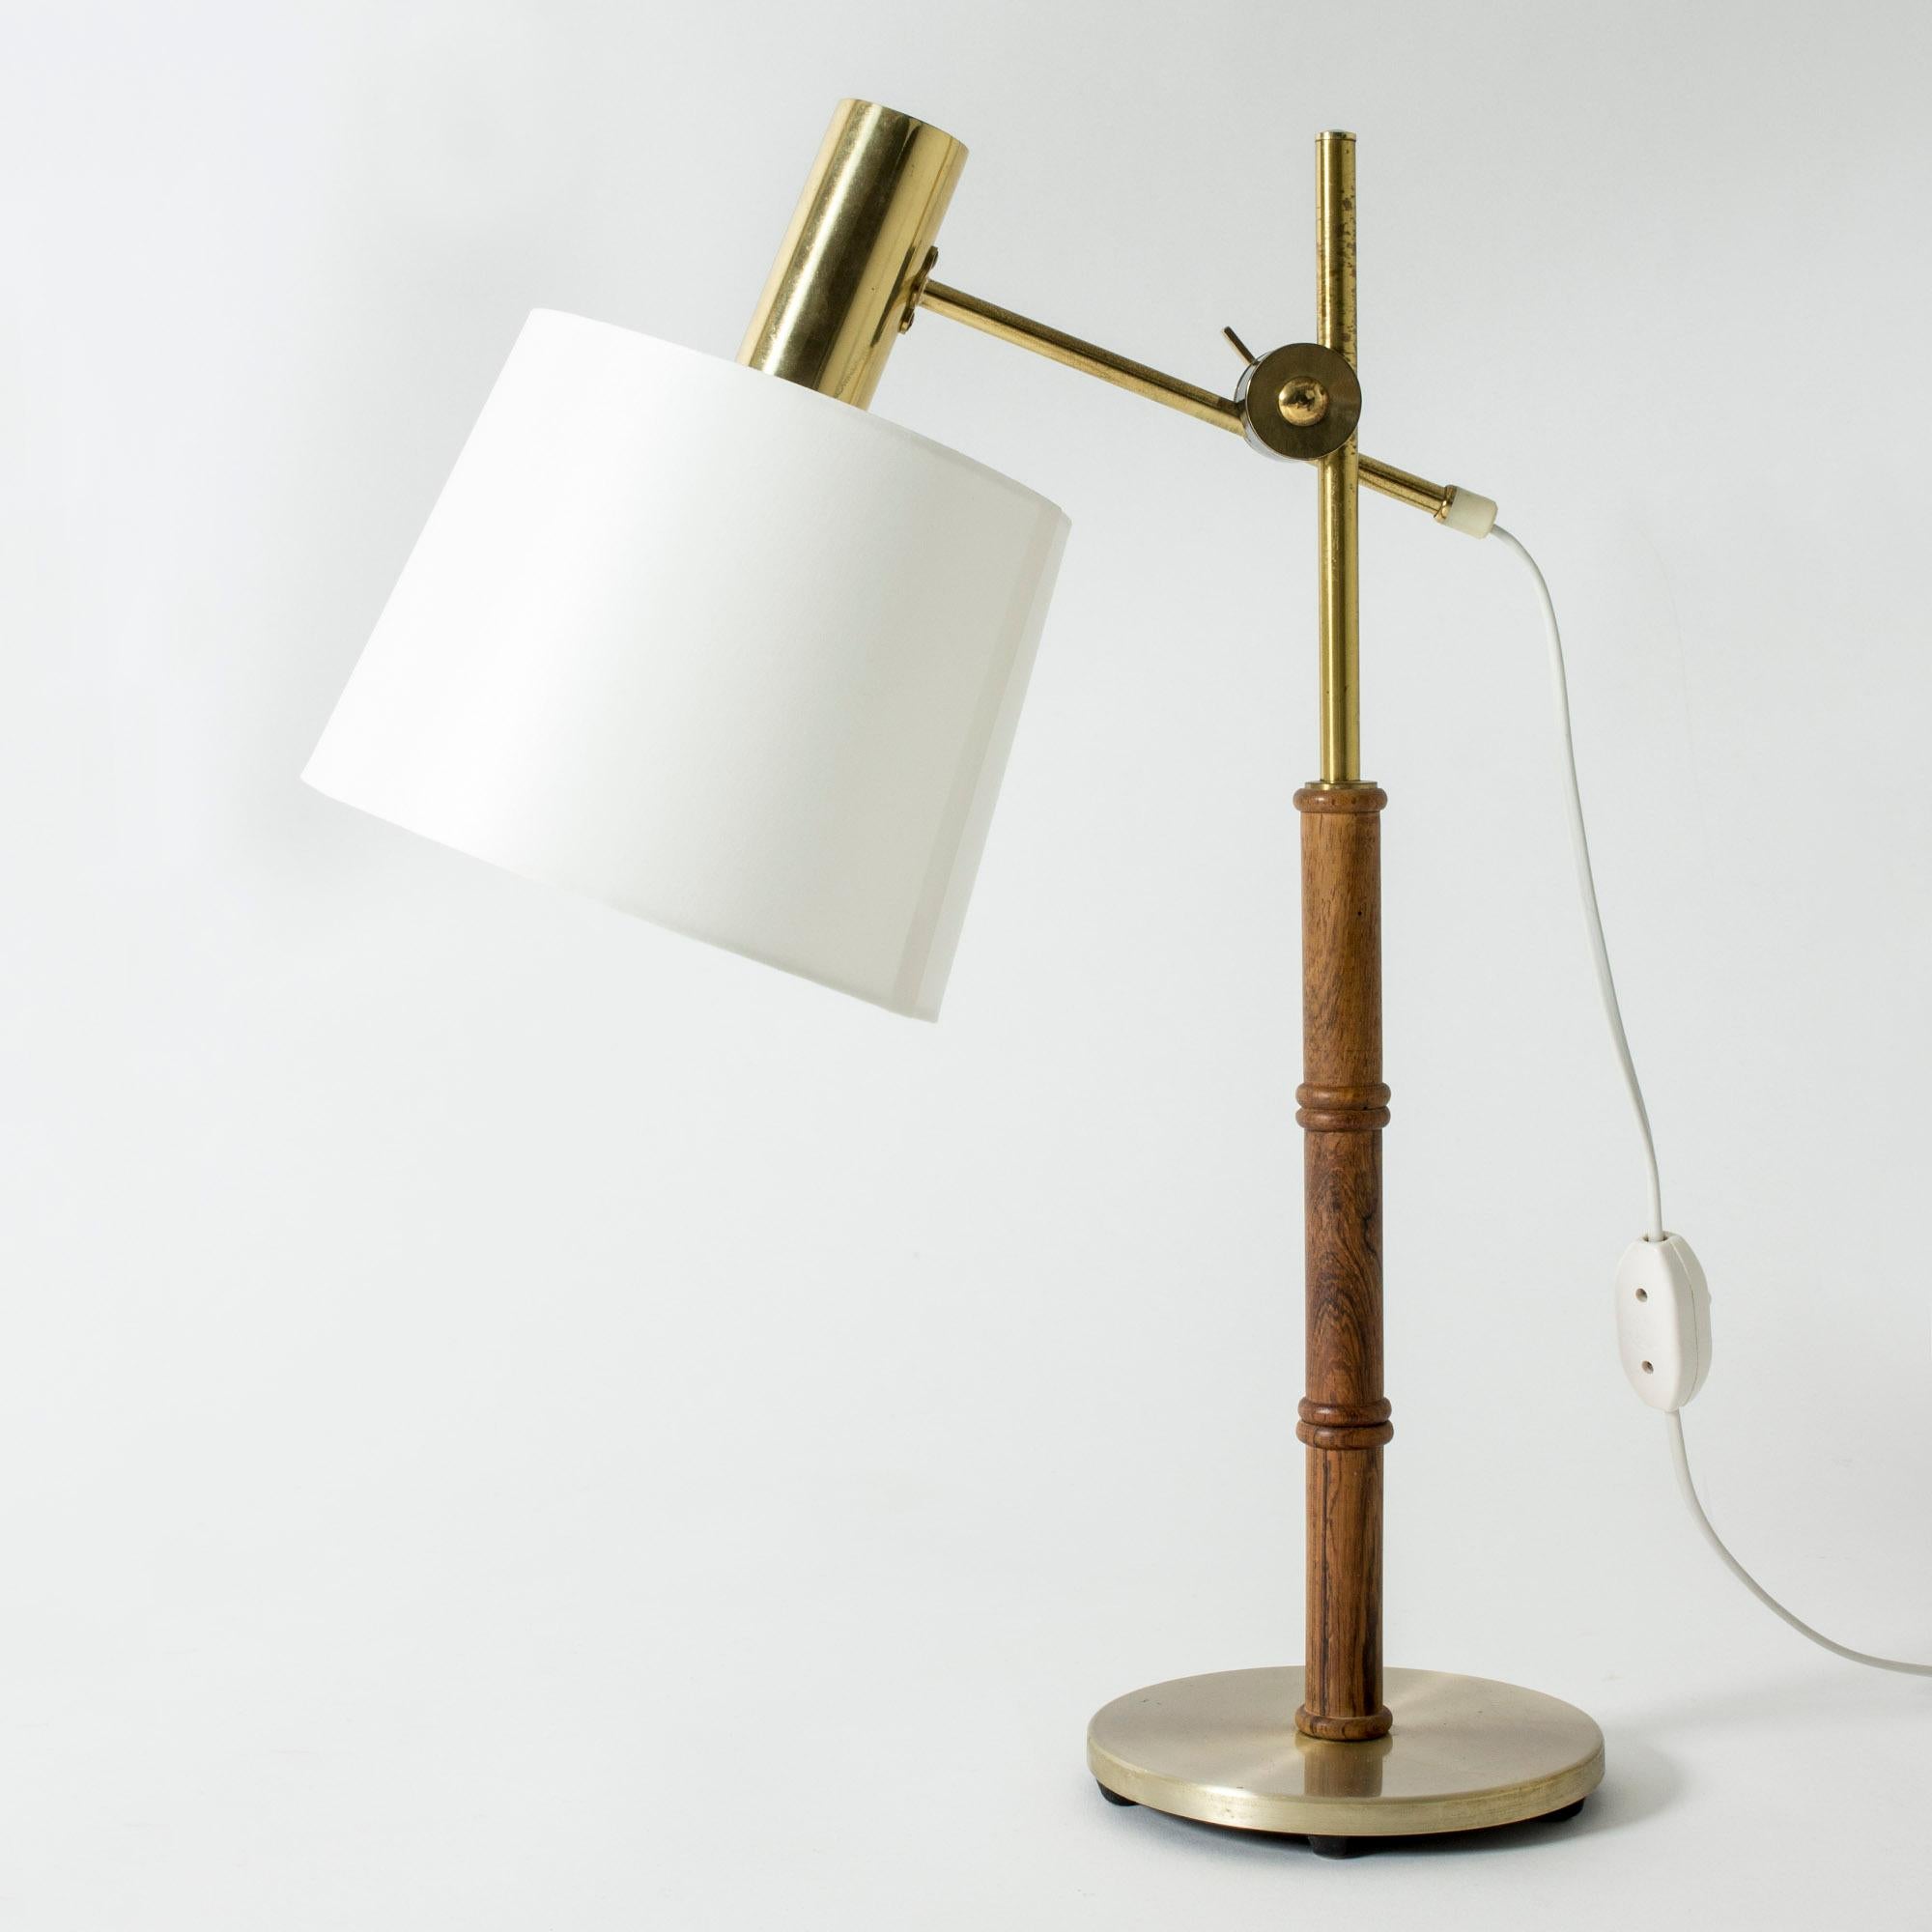 Cool table lamp from Falkenbergs Belysning, made from brass with a rosewood stem. Wood carved into a bamboo-stem form. Adjustable height and angle of the shade.